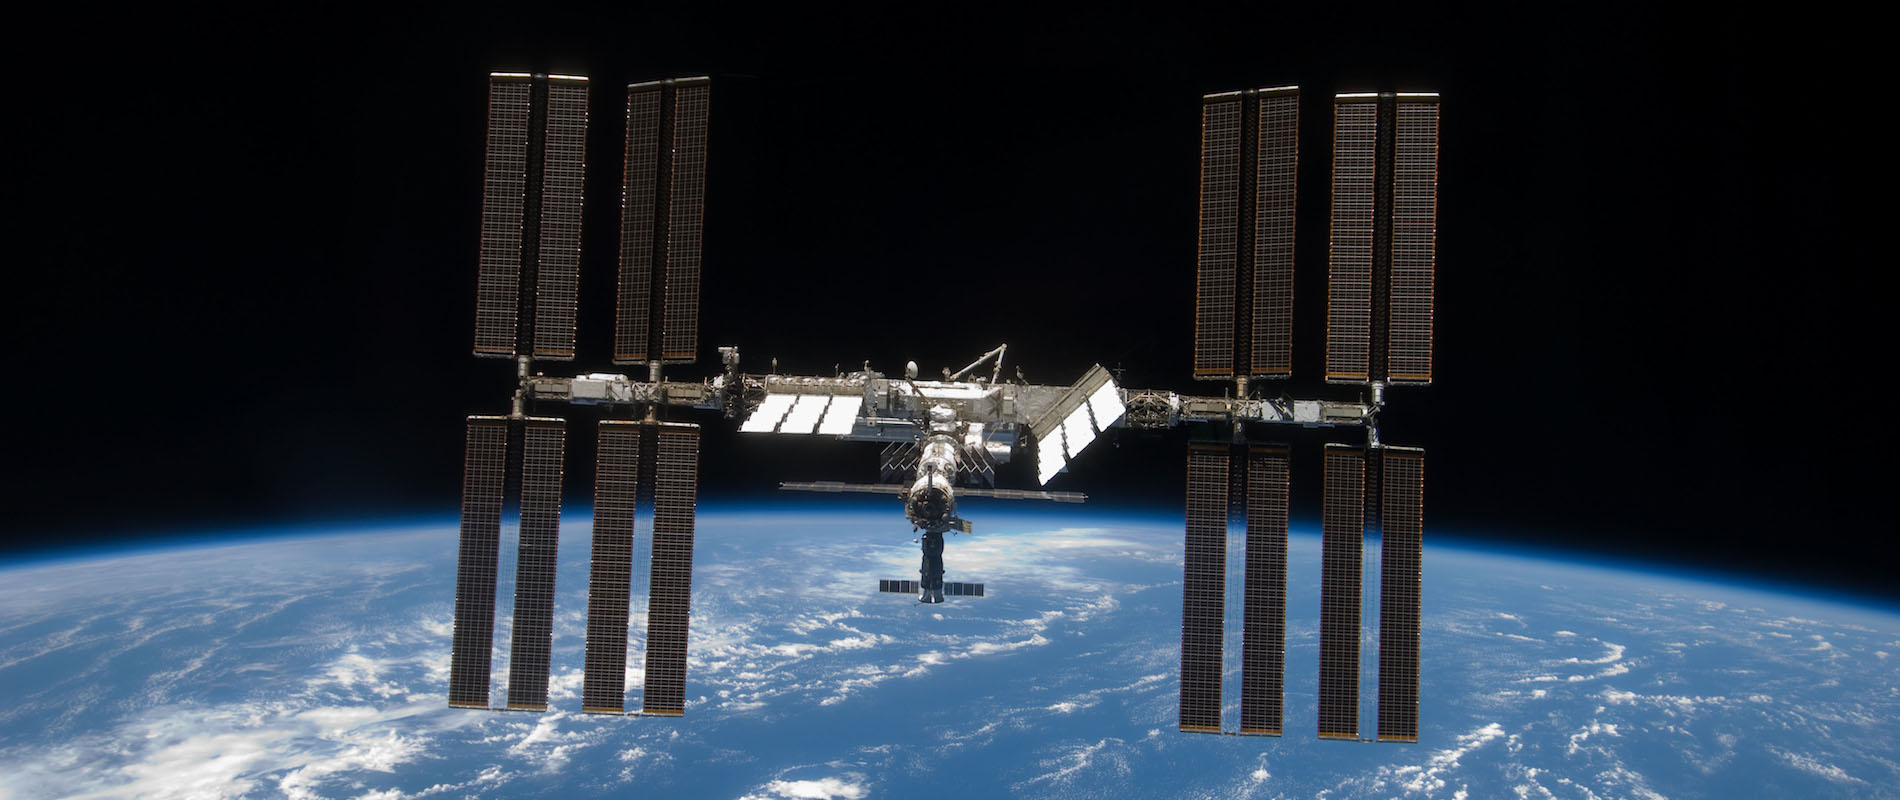 Happy 15th anniversary to International Space Station!